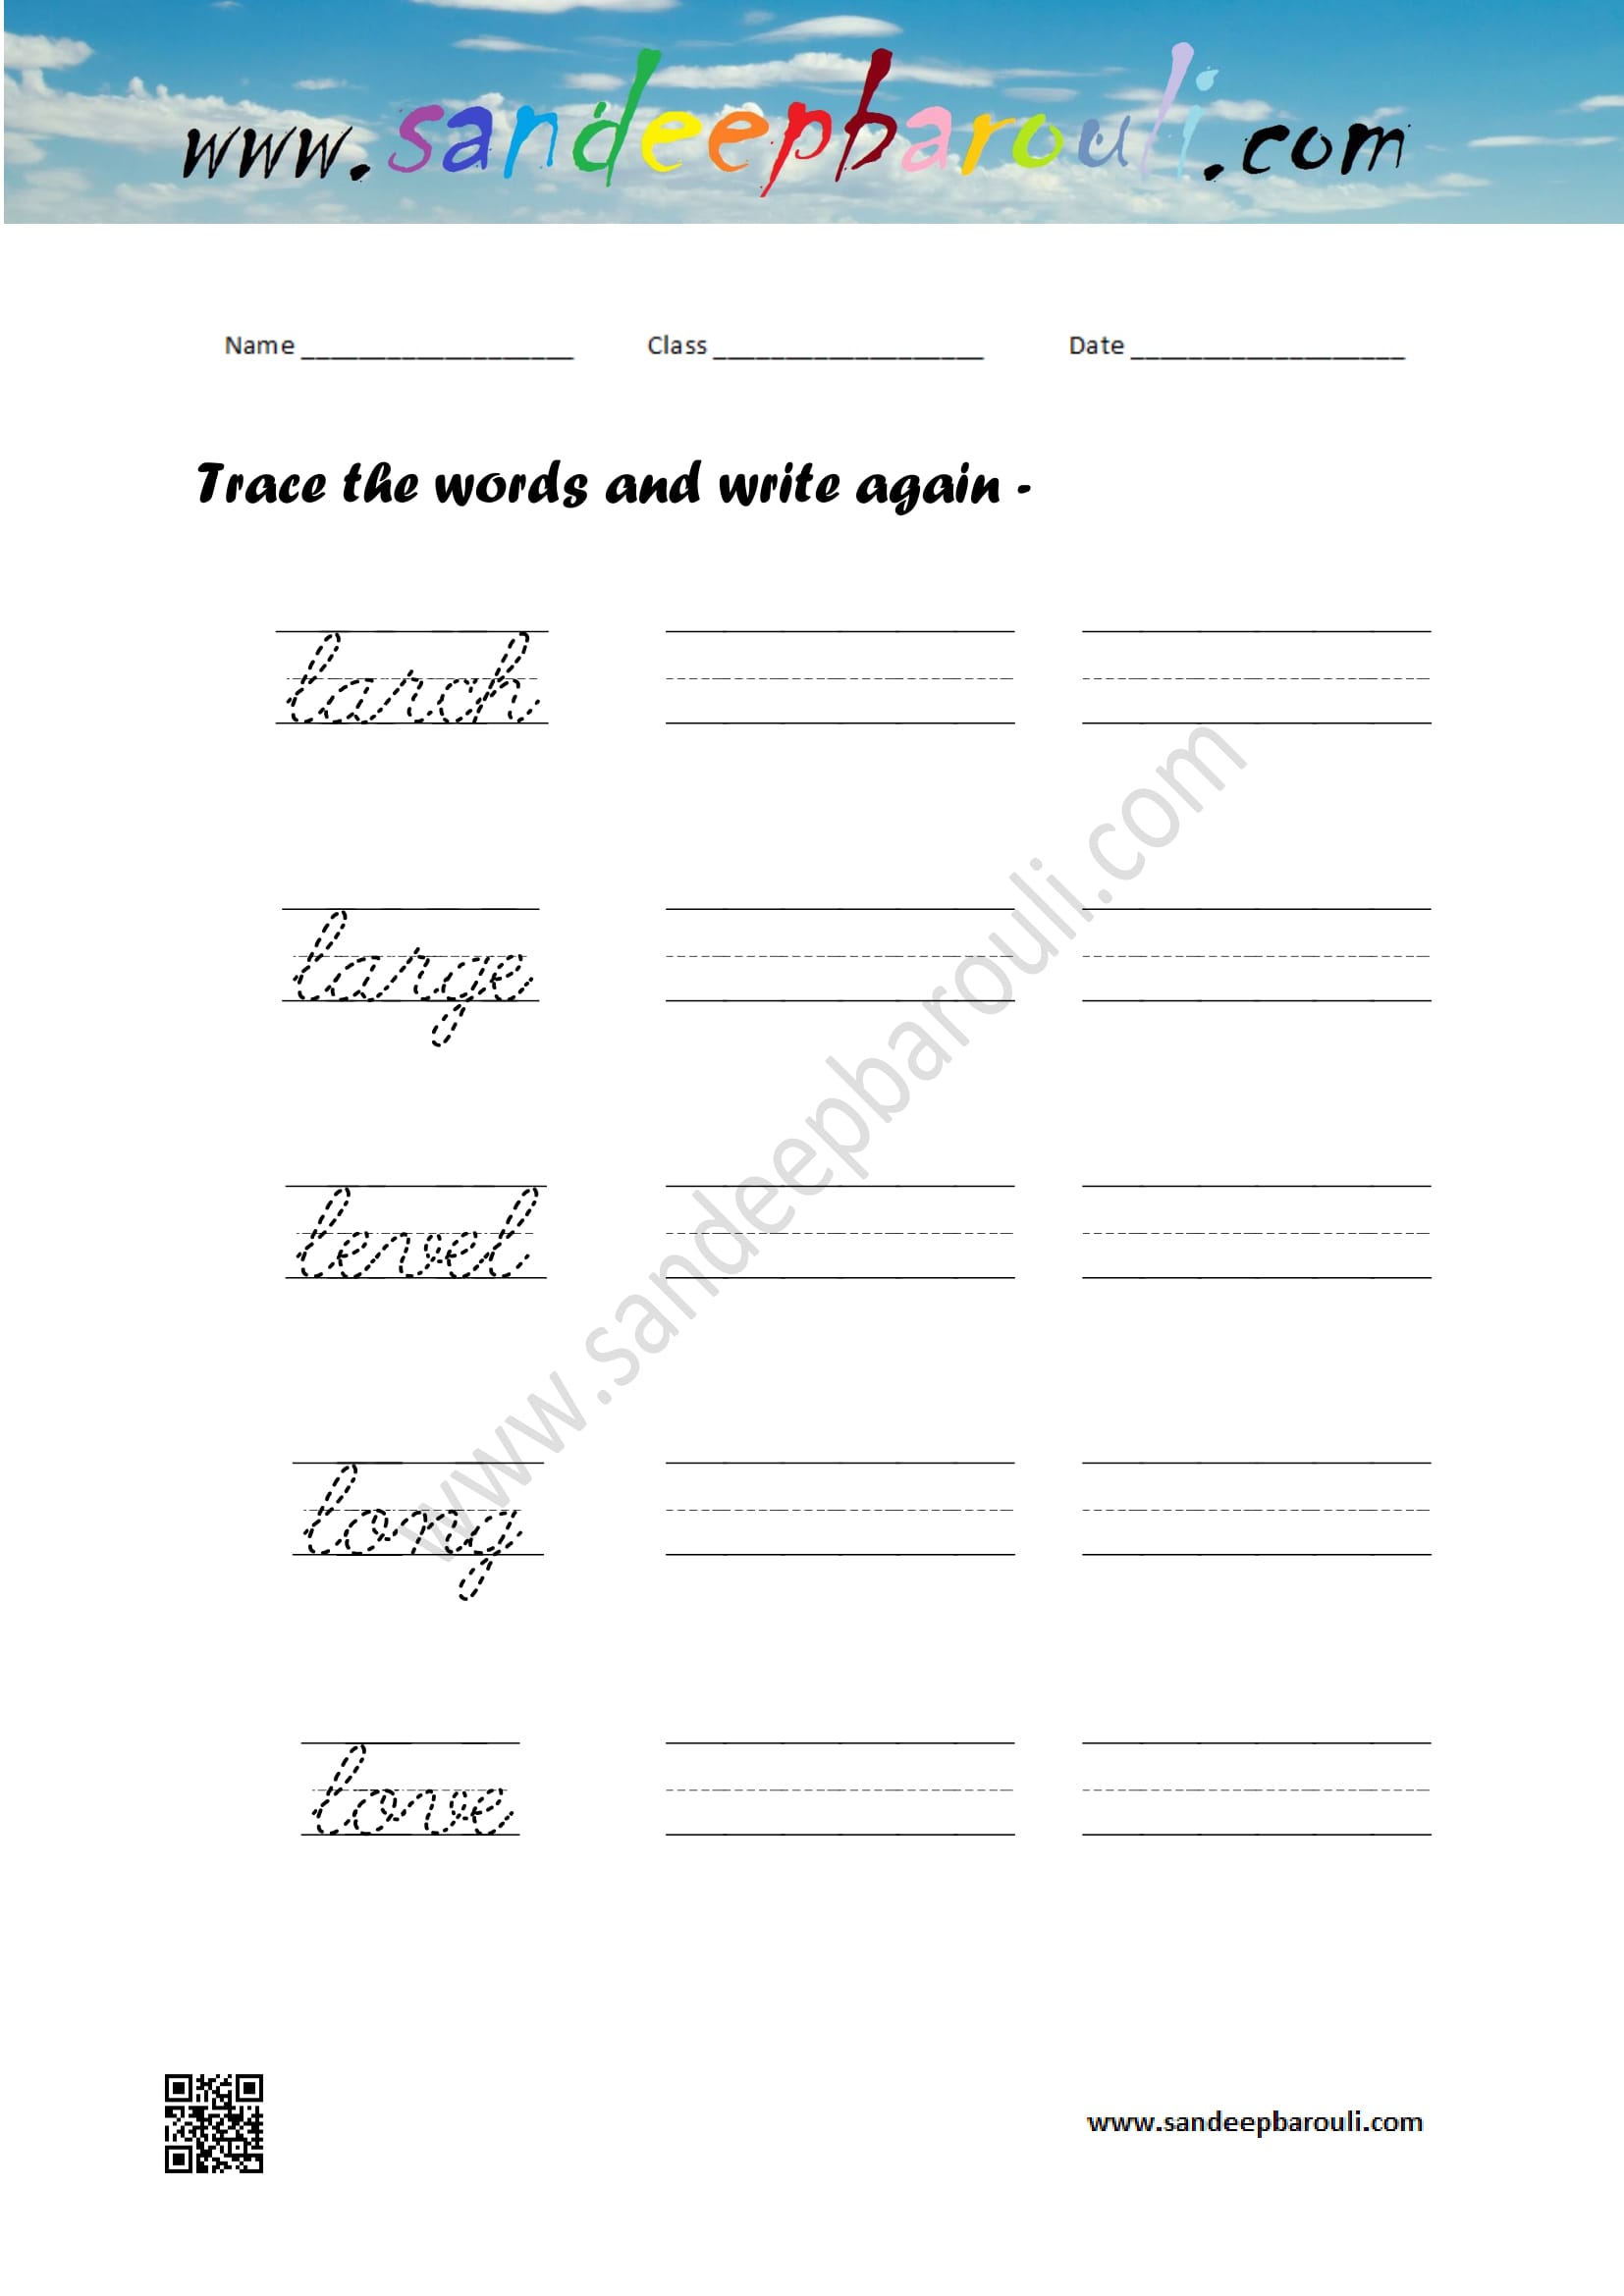 Cursive writing worksheet – trace the words and write again (99)